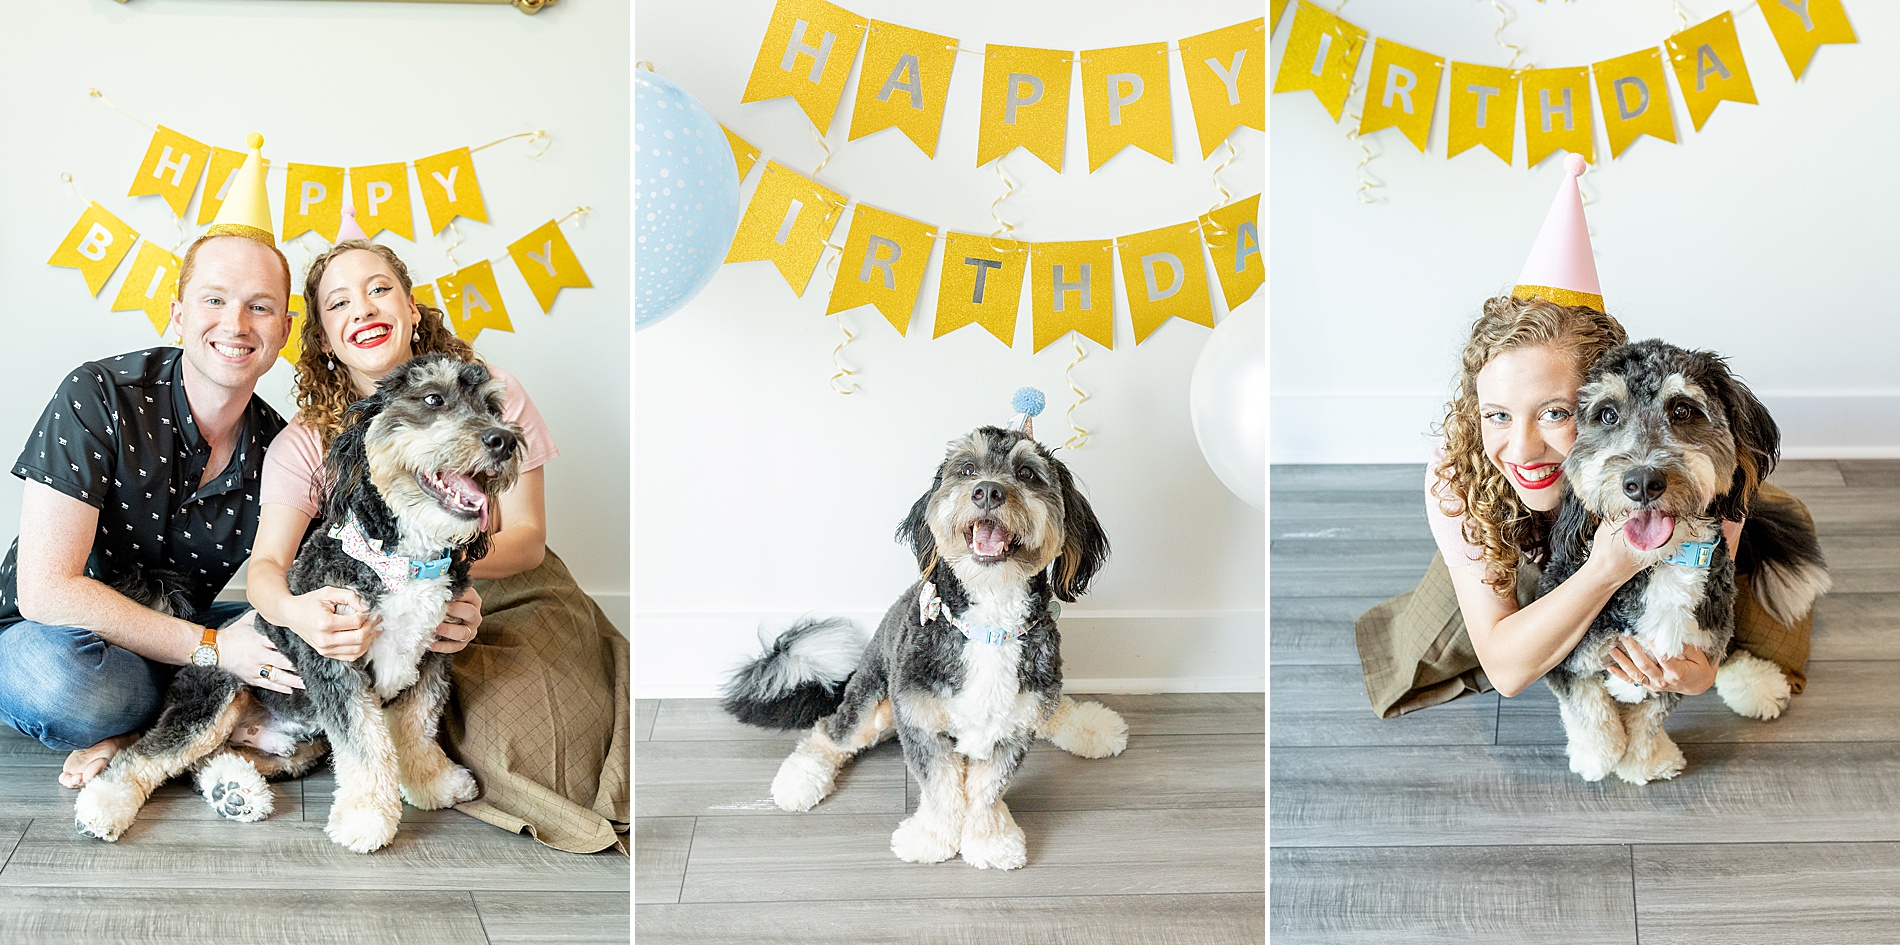 couples hold their dog and celebrate dog's birthday